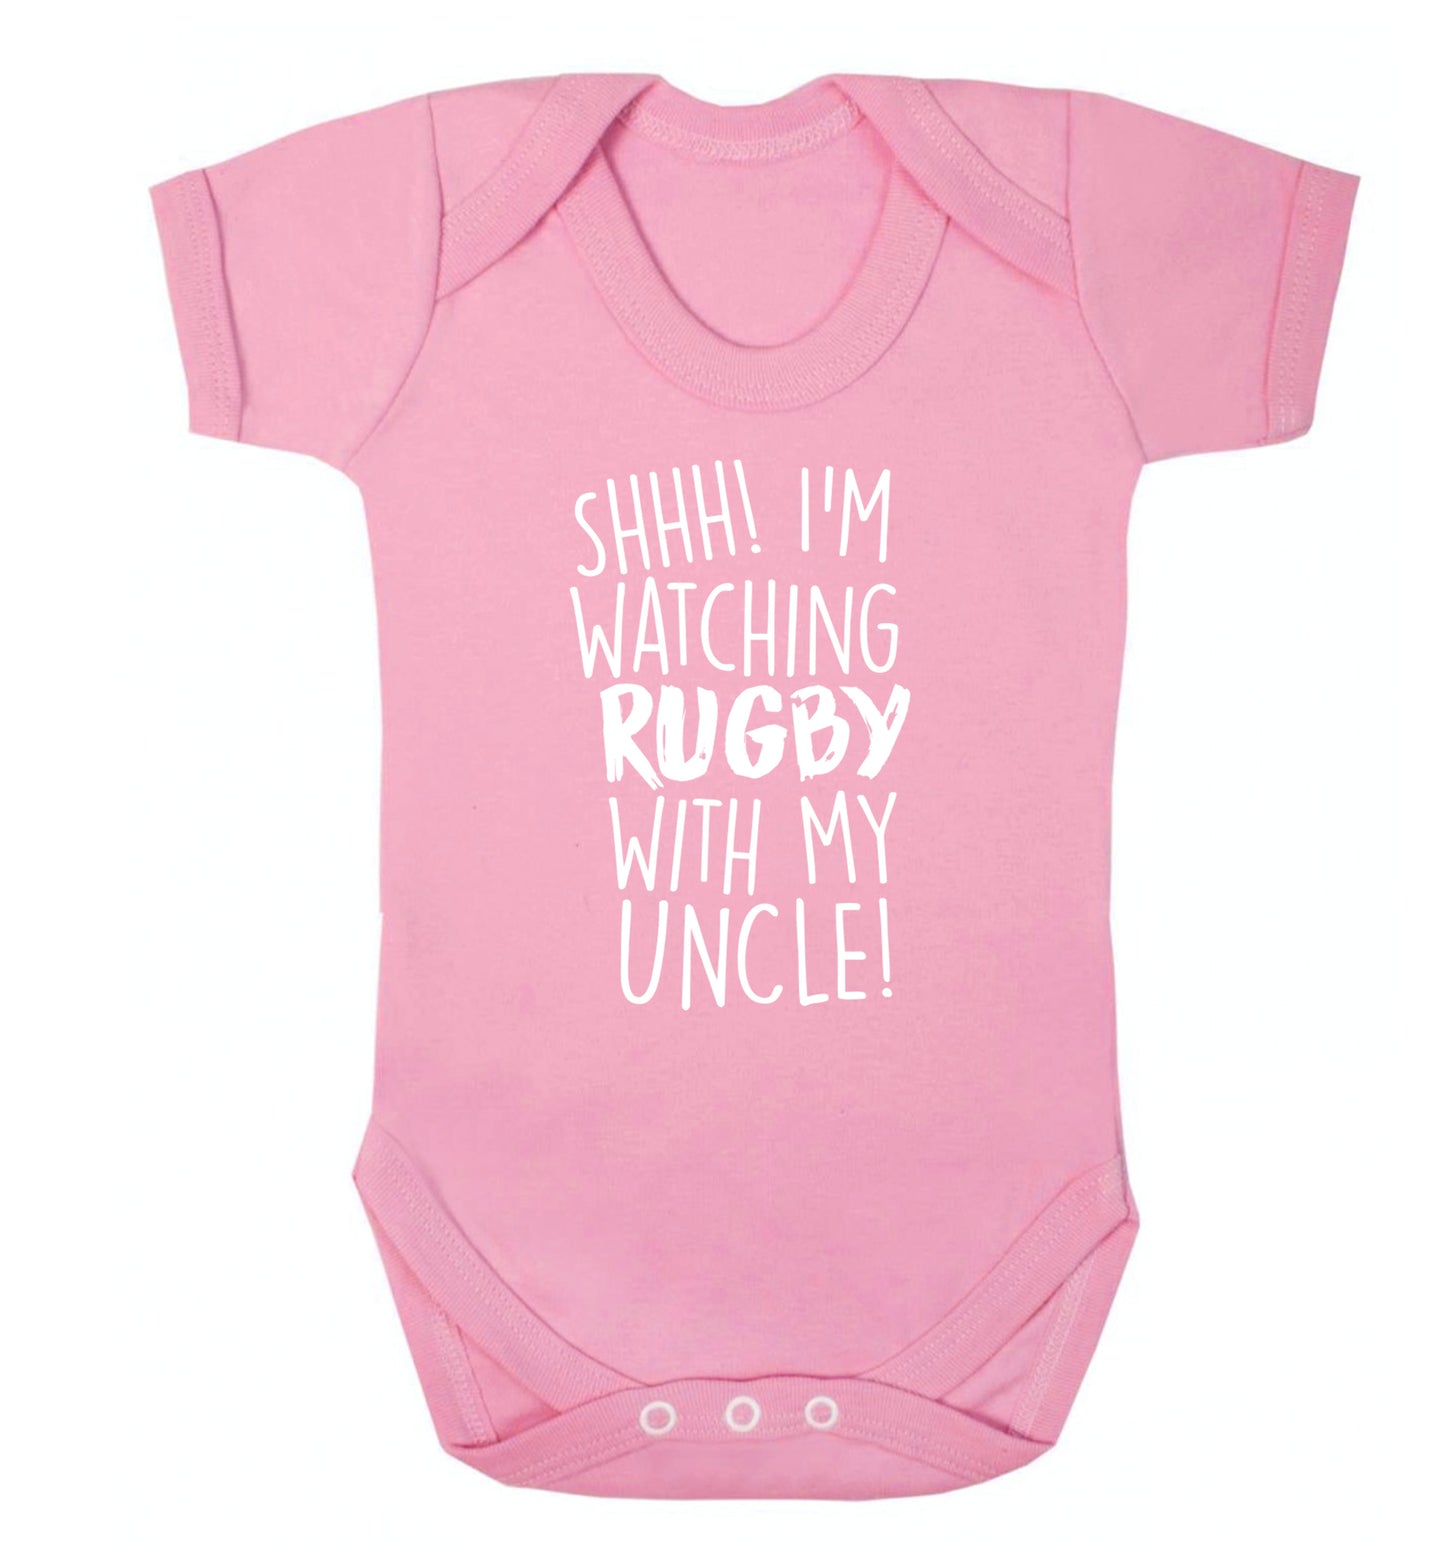 Shh.. I'm watching rugby with my uncle Baby Vest pale pink 18-24 months